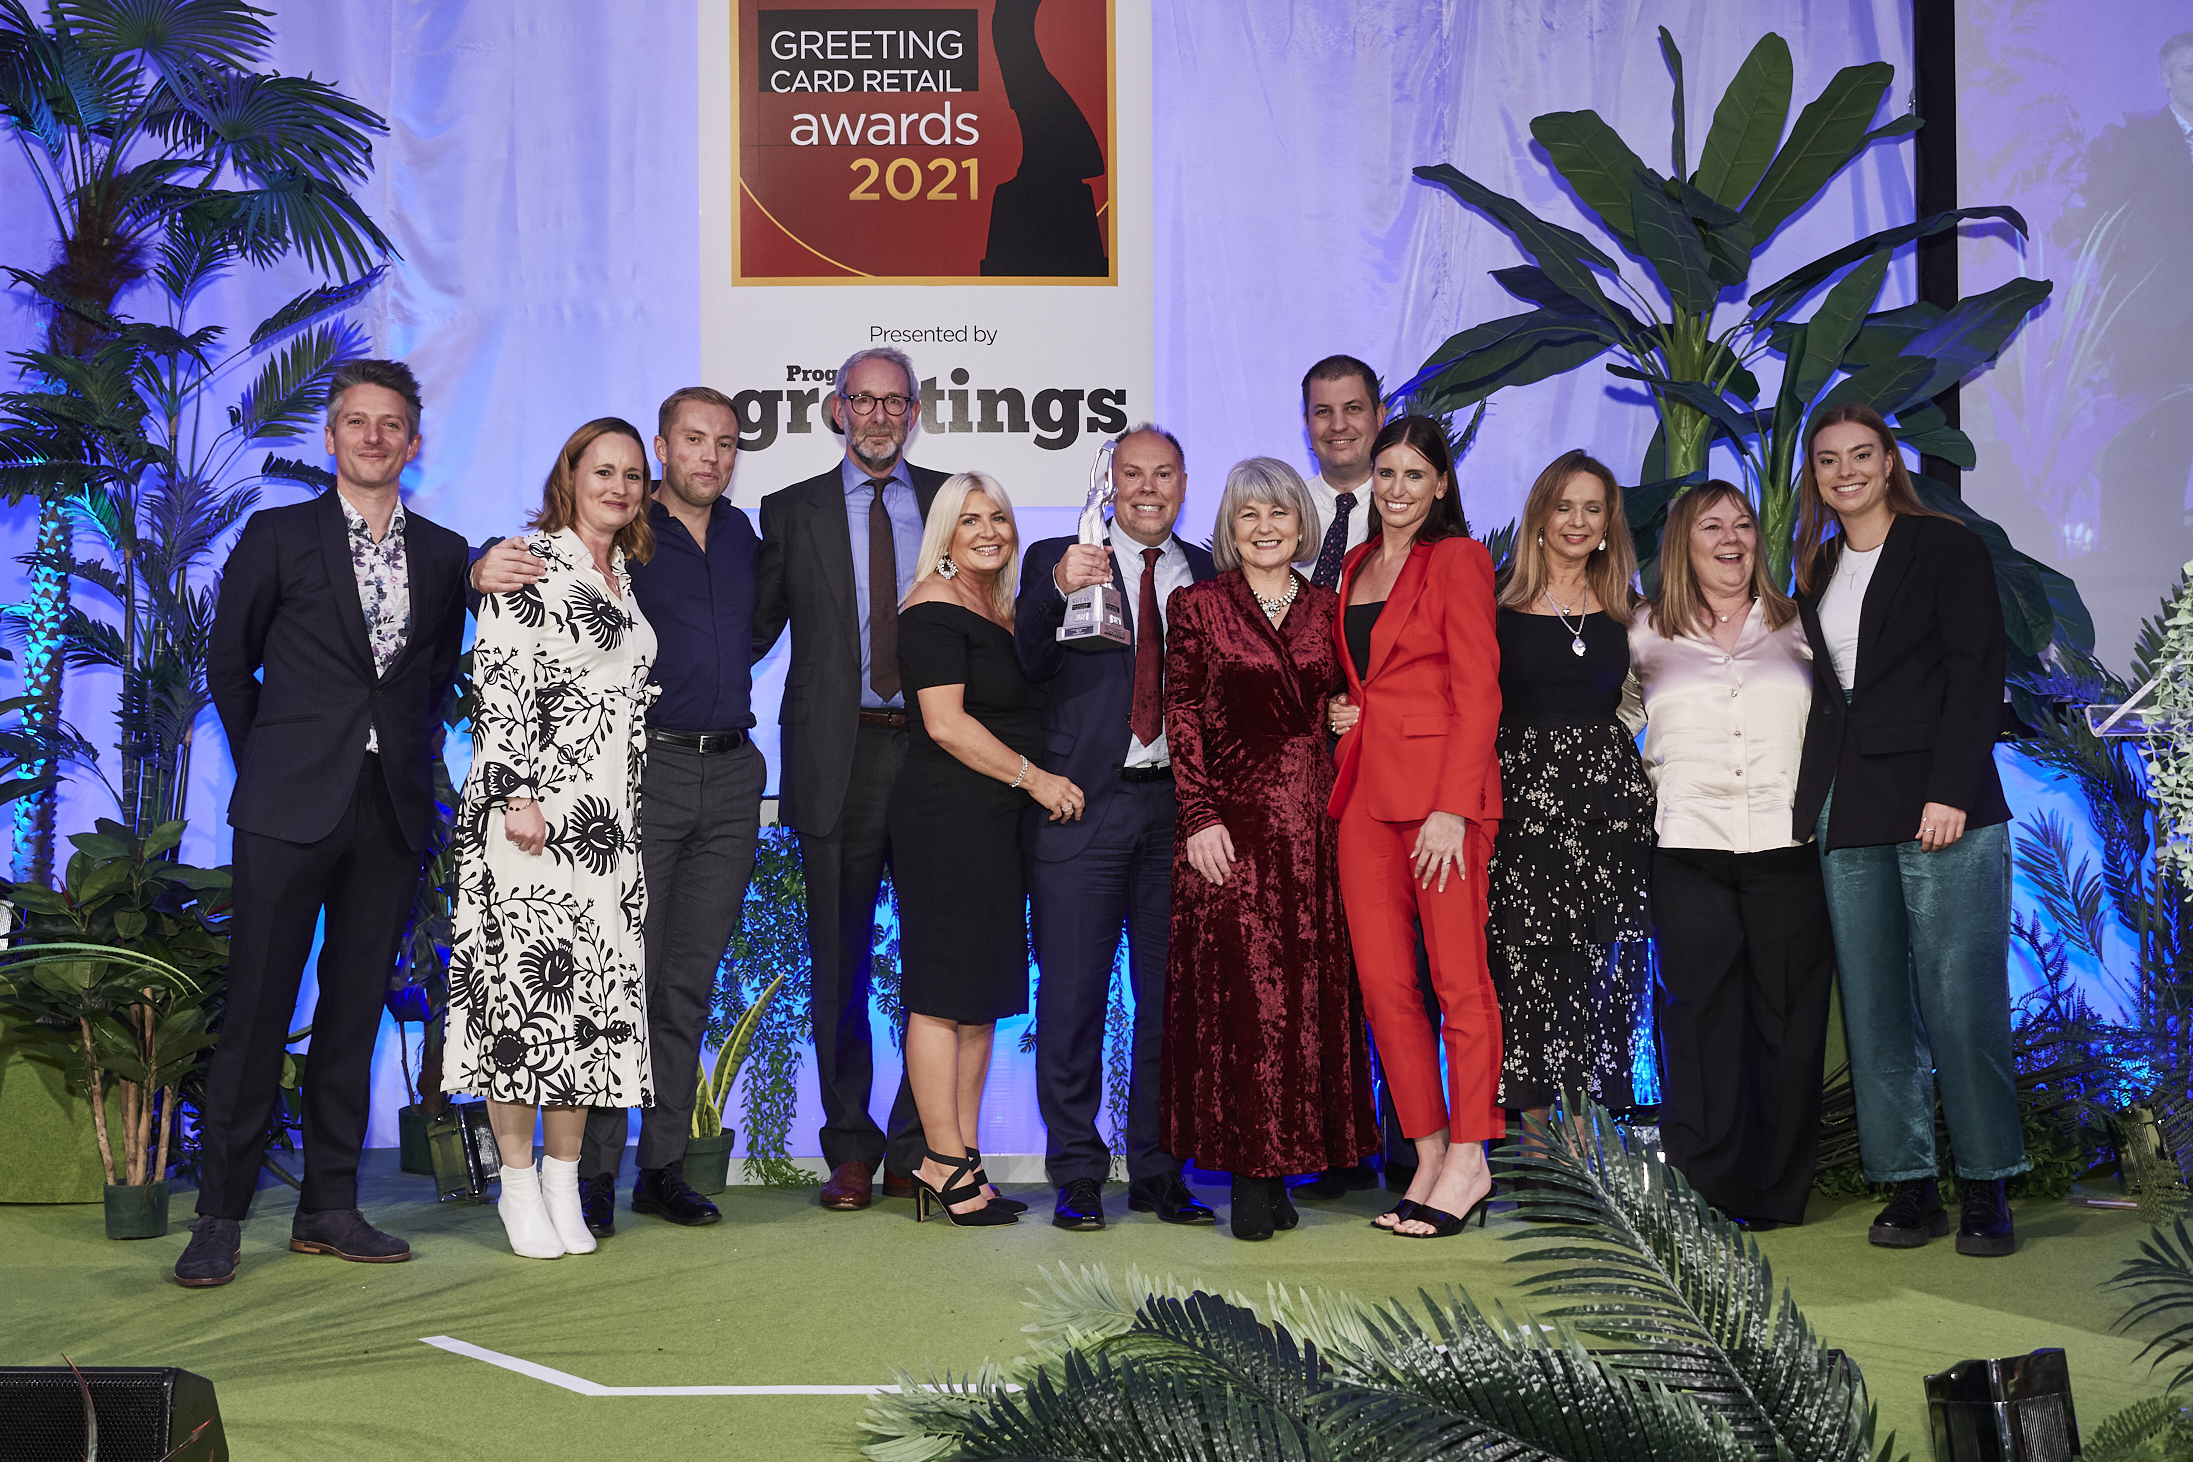 Above: Paul Taylor holding The Retas trophy for Greeting Card Retailer of the Year 2021, on stage at the Grosvenor House Hotel with members of the retail team.